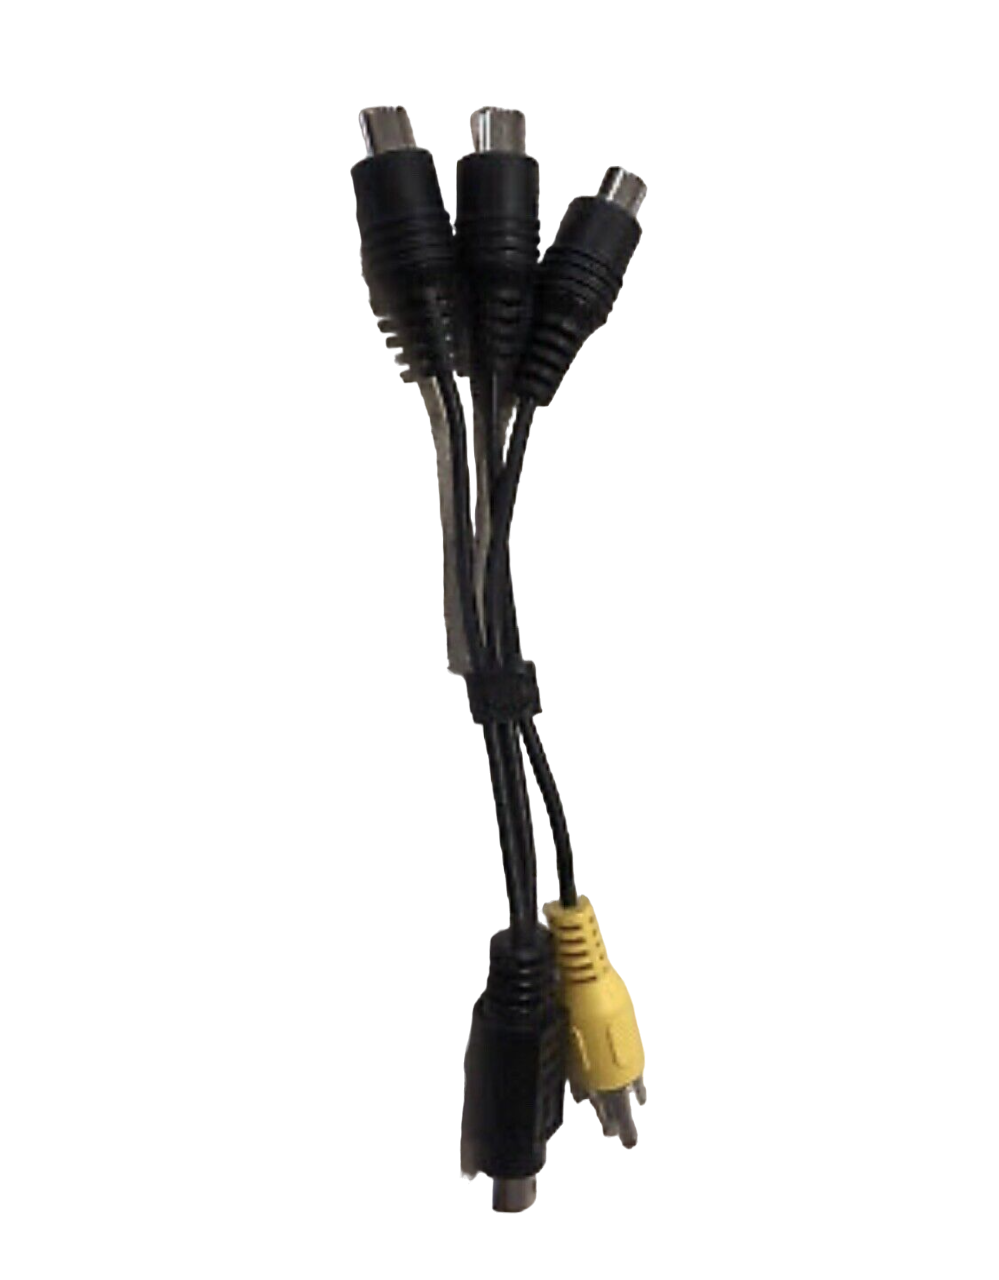 Component Video Adapter For Bose Lifestyle 18,28,35 Entertainment Systems